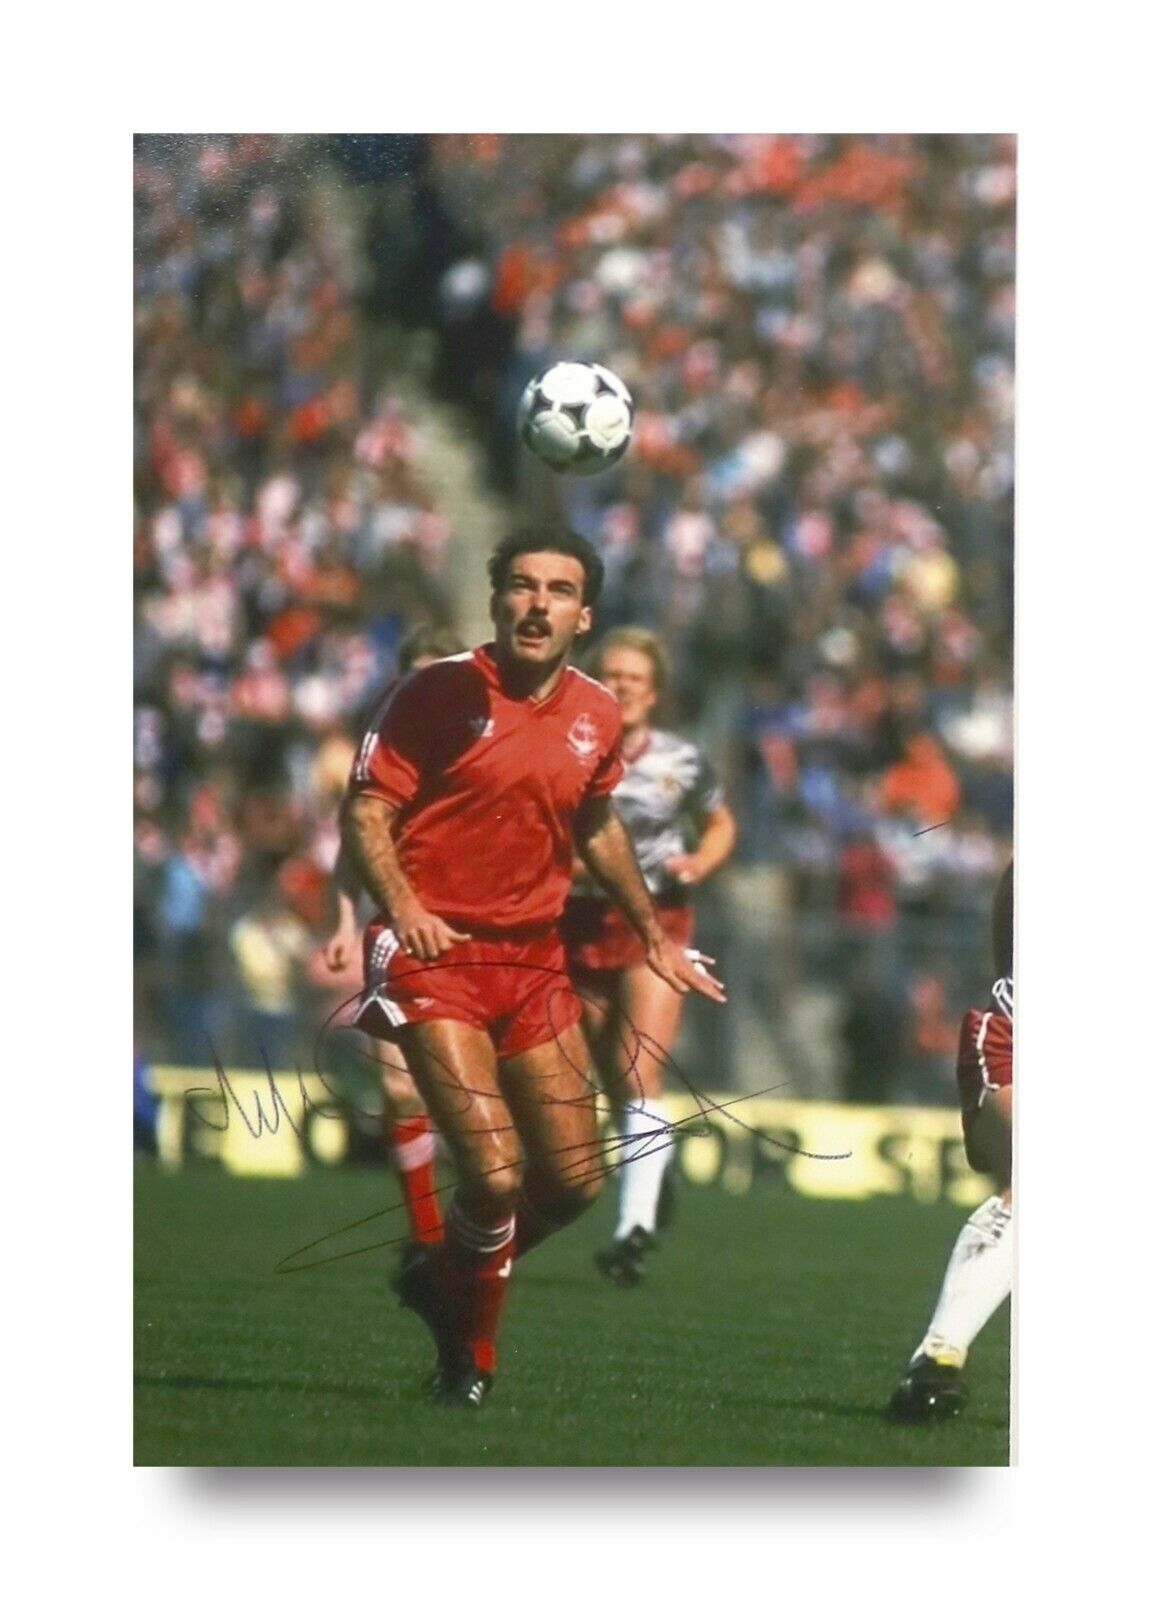 Willie Miller Hand Signed 6x4 Photo Poster painting Aberdeen Genuine Autograph Memorabilia + COA